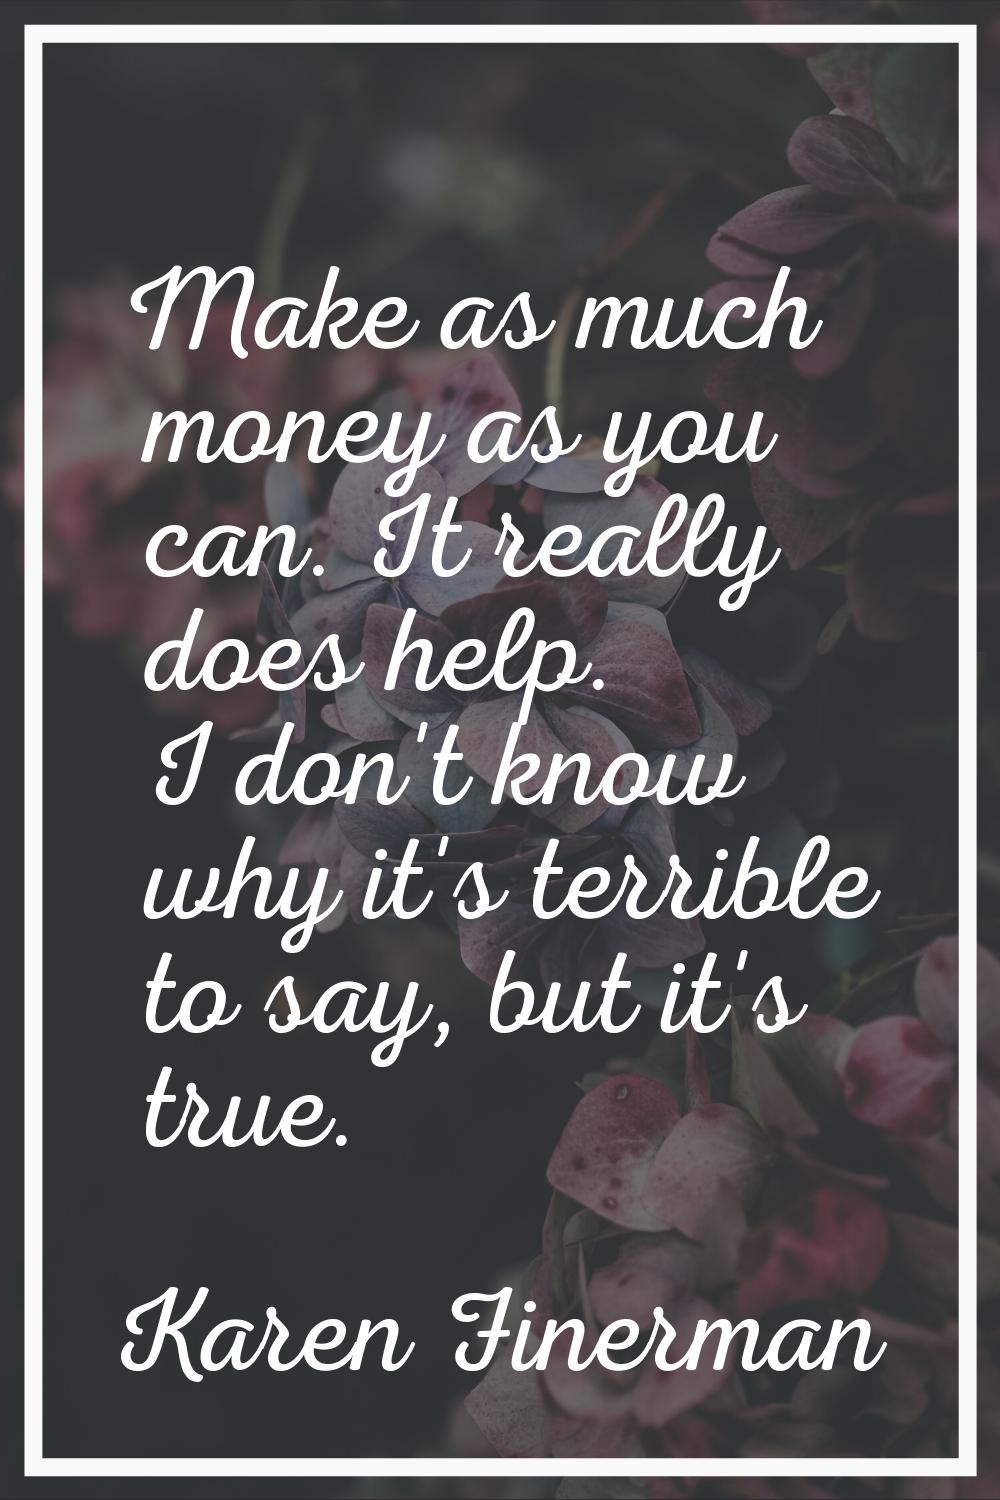 Make as much money as you can. It really does help. I don't know why it's terrible to say, but it's